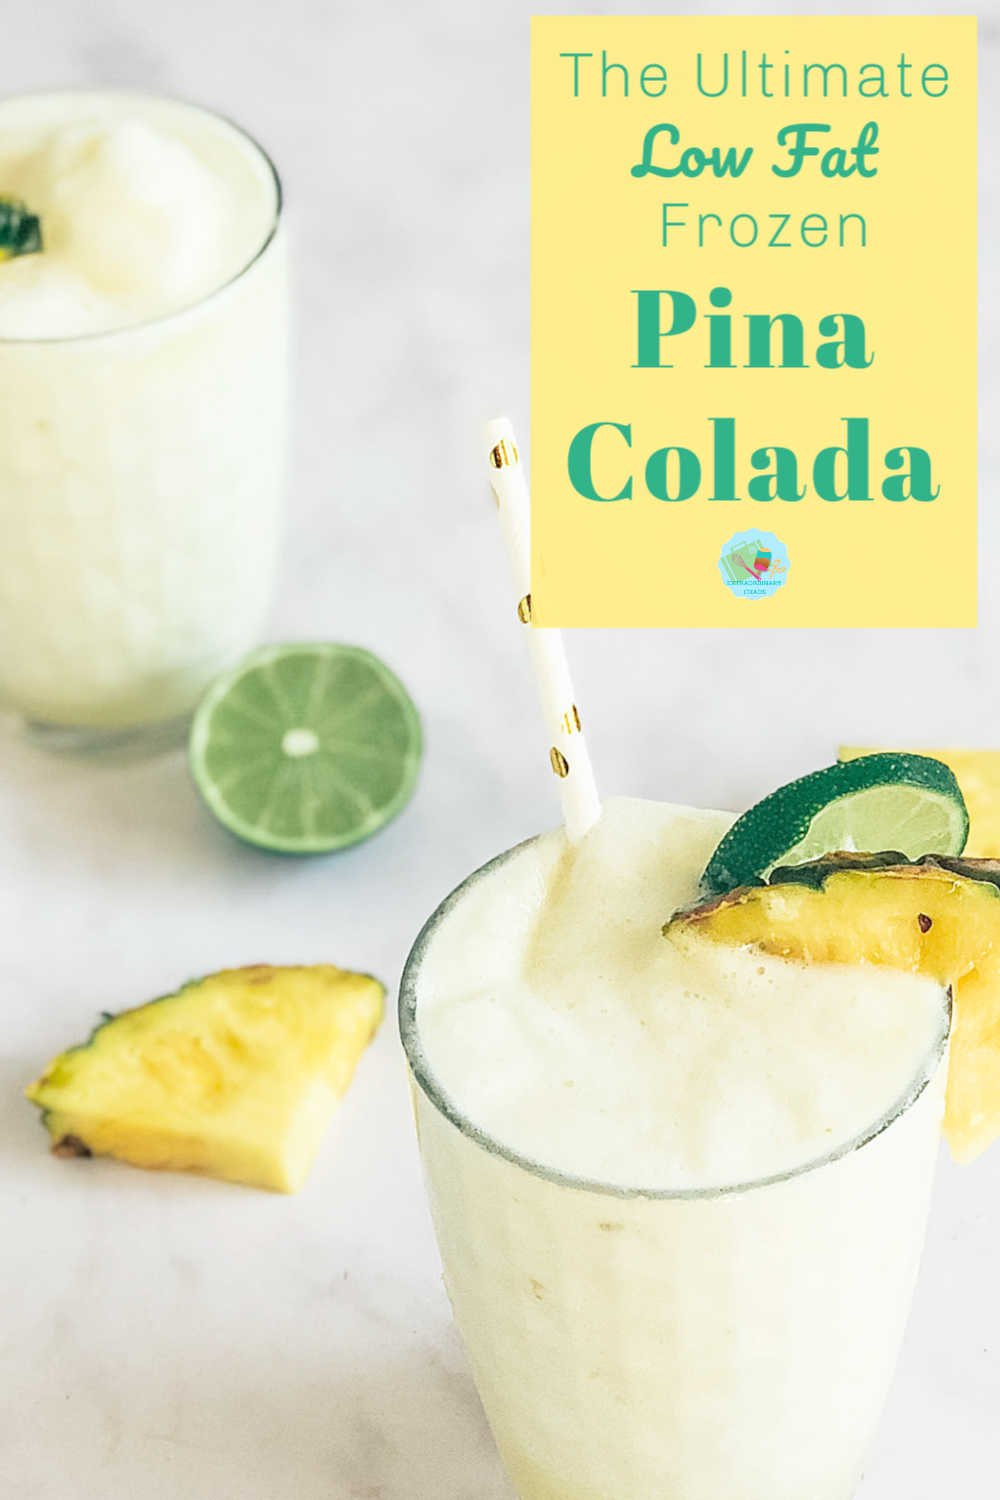 Easy cocktail recipe, how to make a low fat Pina colada